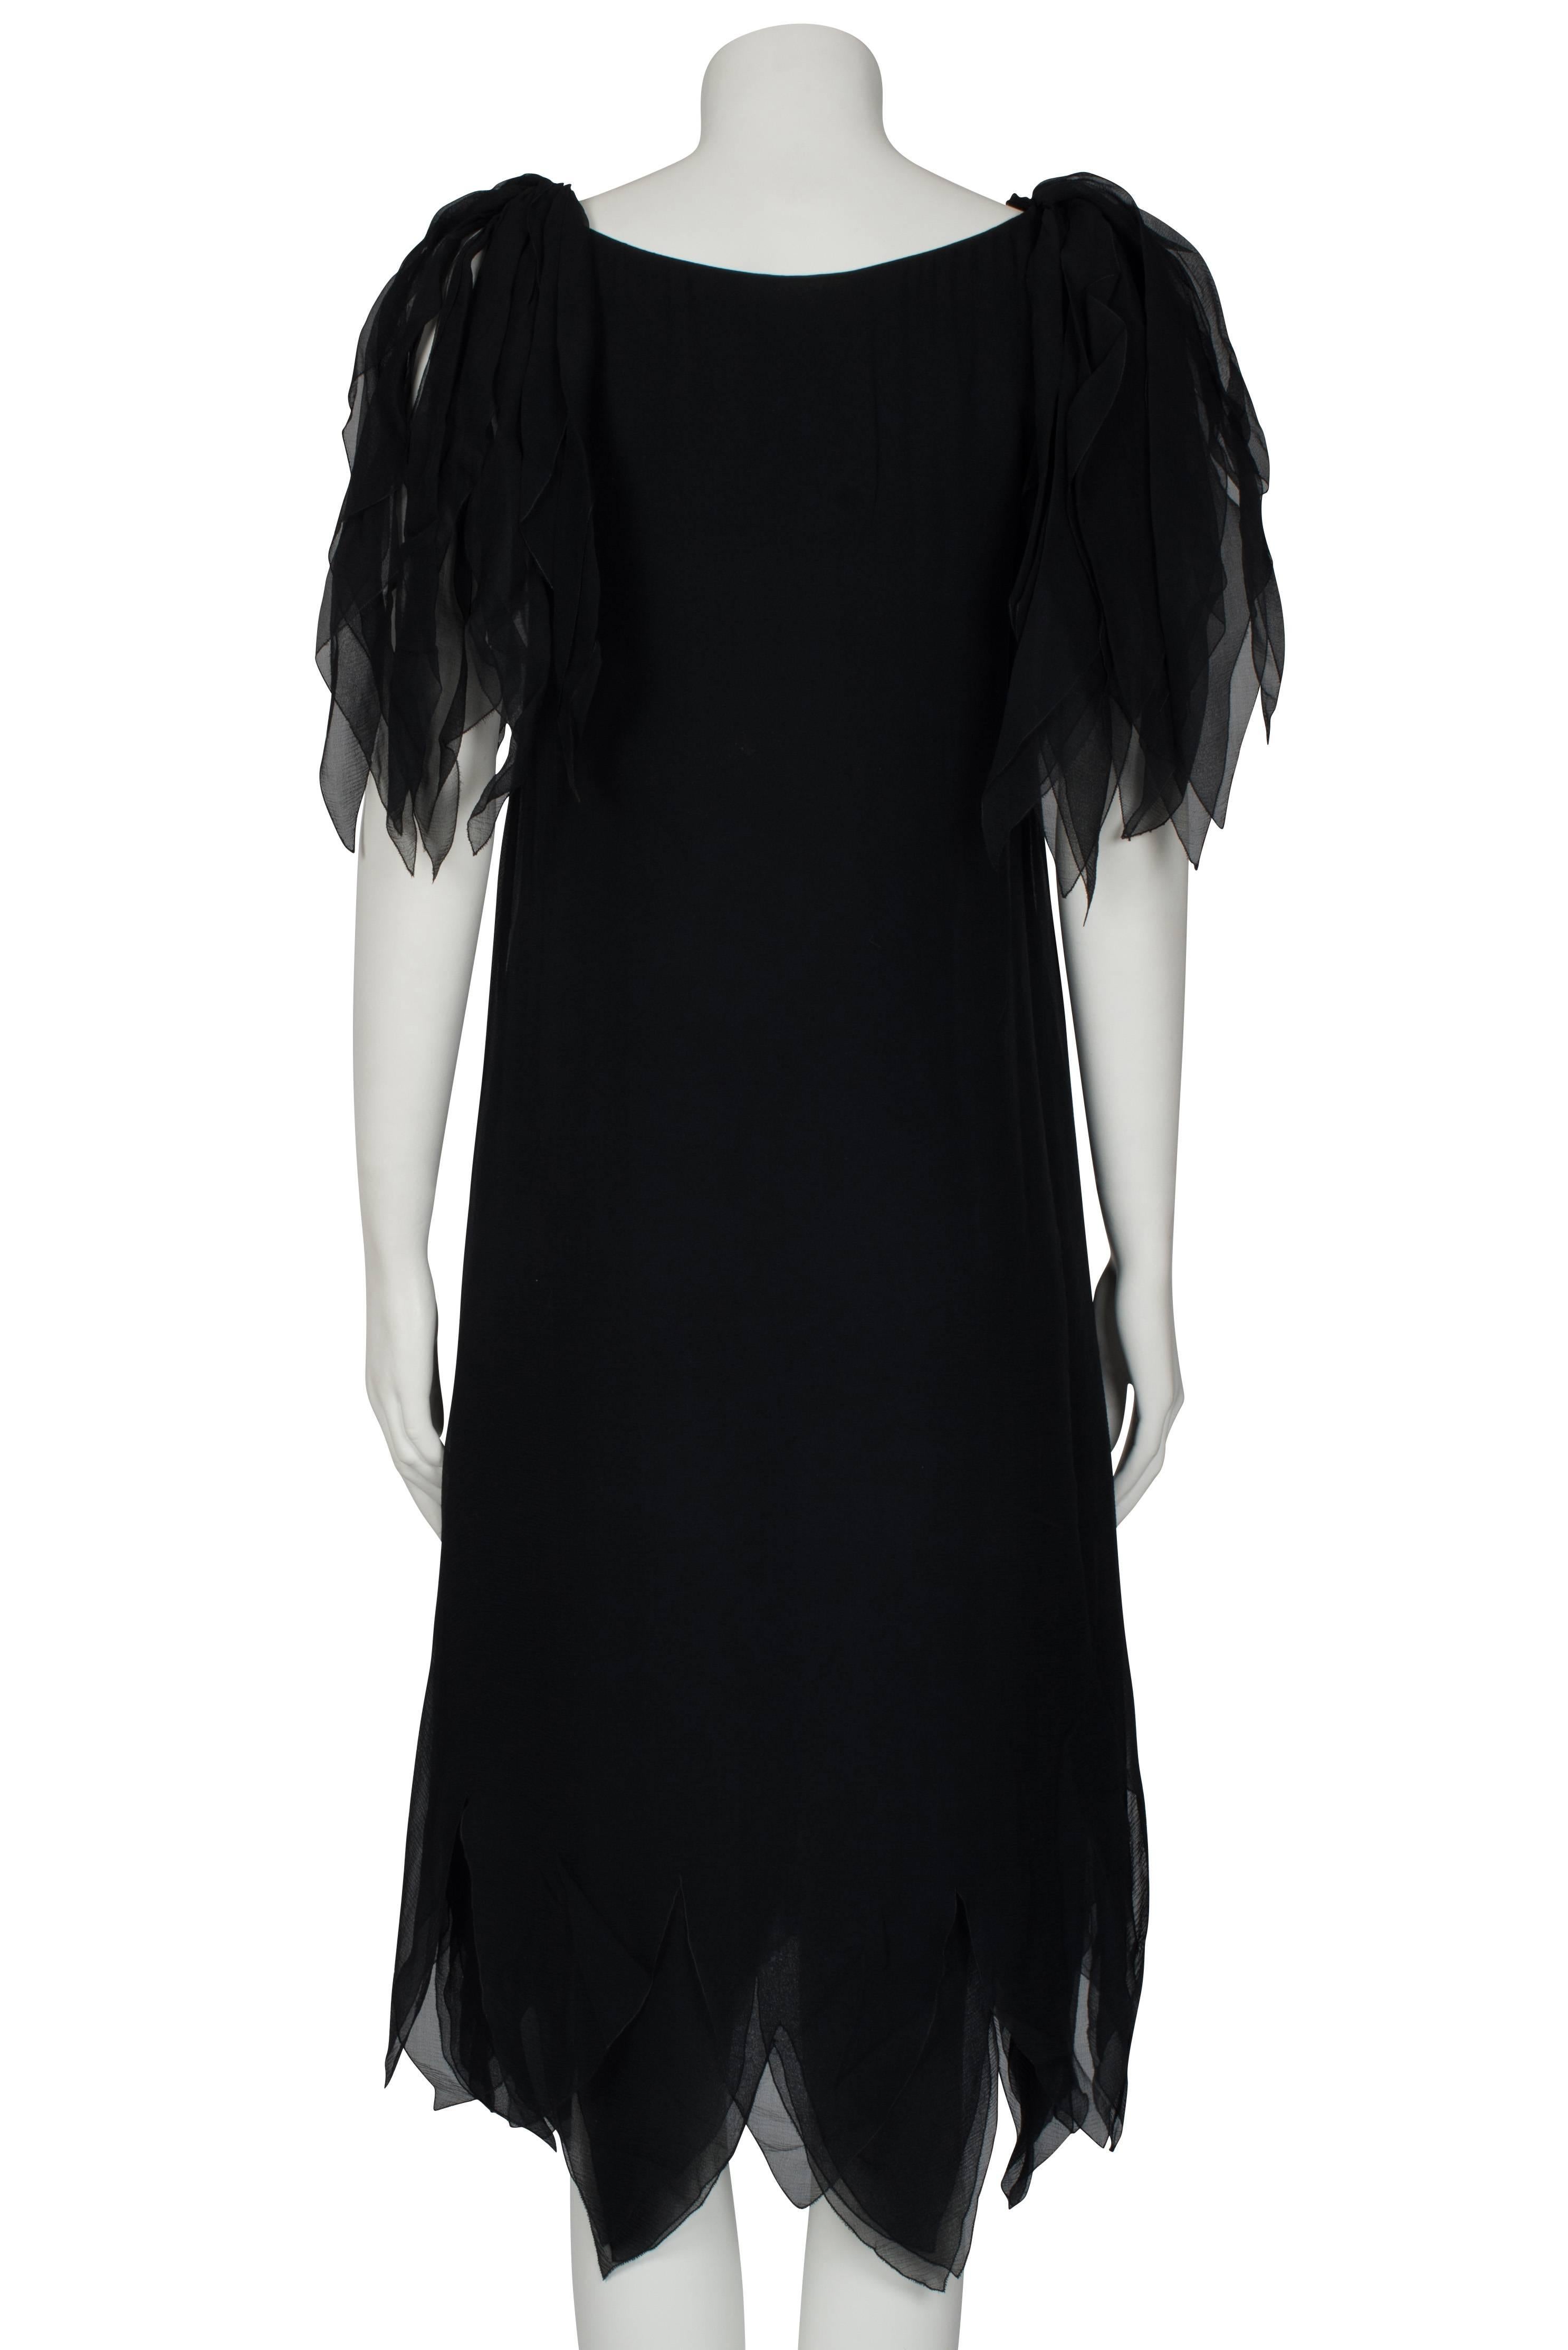 Christian Dior Couture Black Chiffon Shift Dress Spring/Summer 1980 For Sale 2